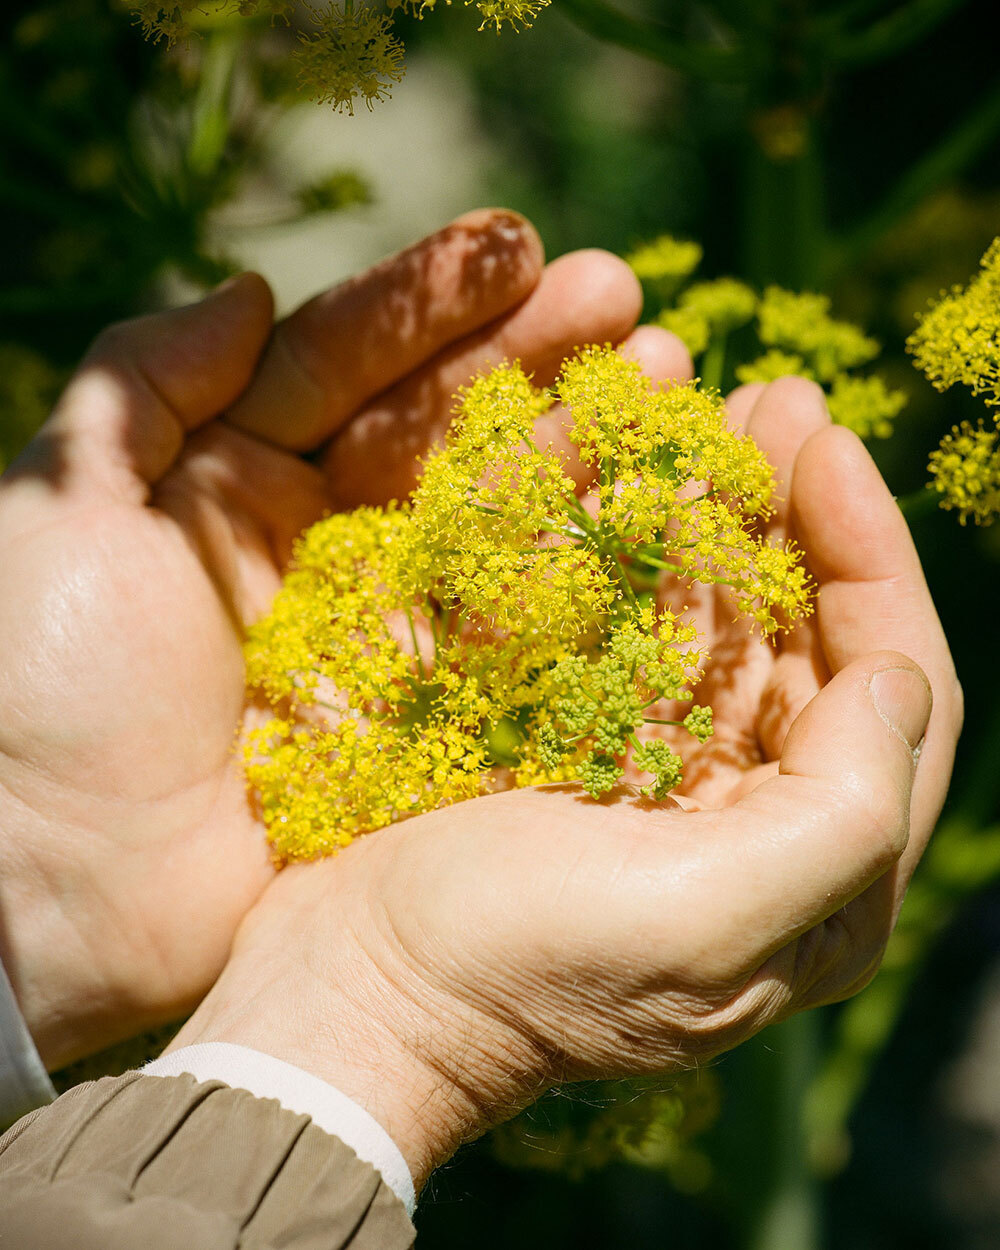 A person cups a handful of yellow blooms